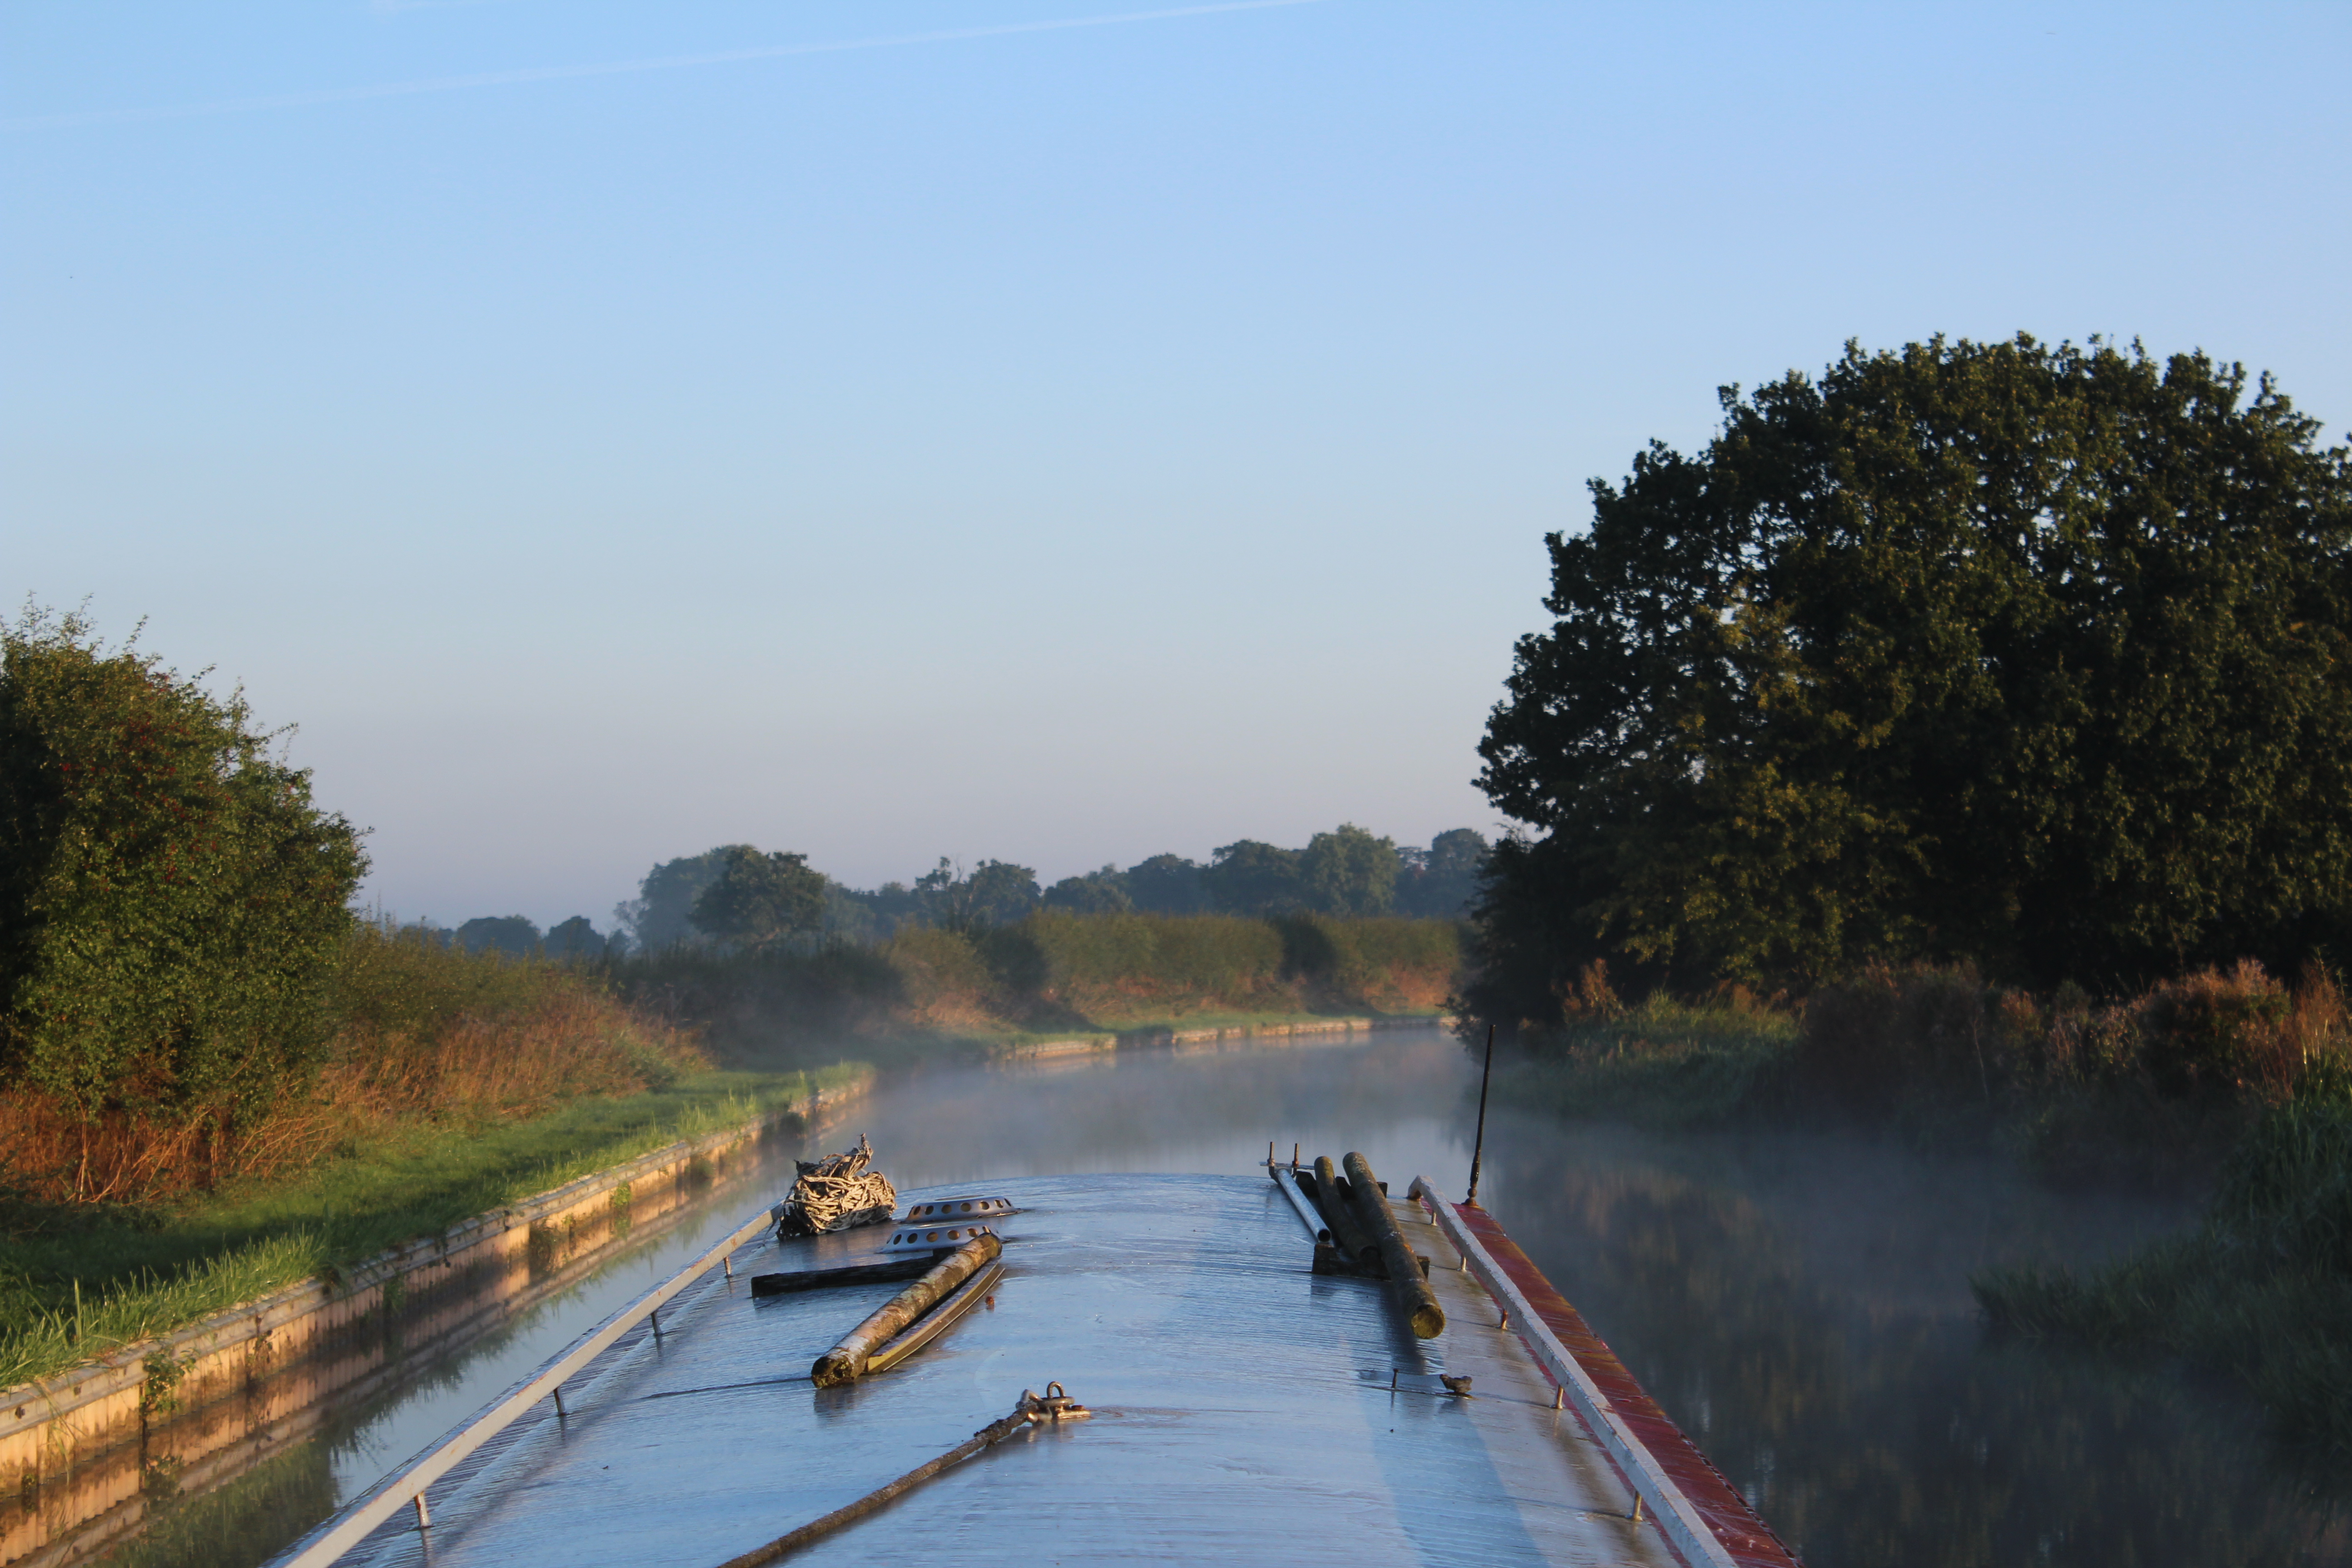 Morning Mist on the canal